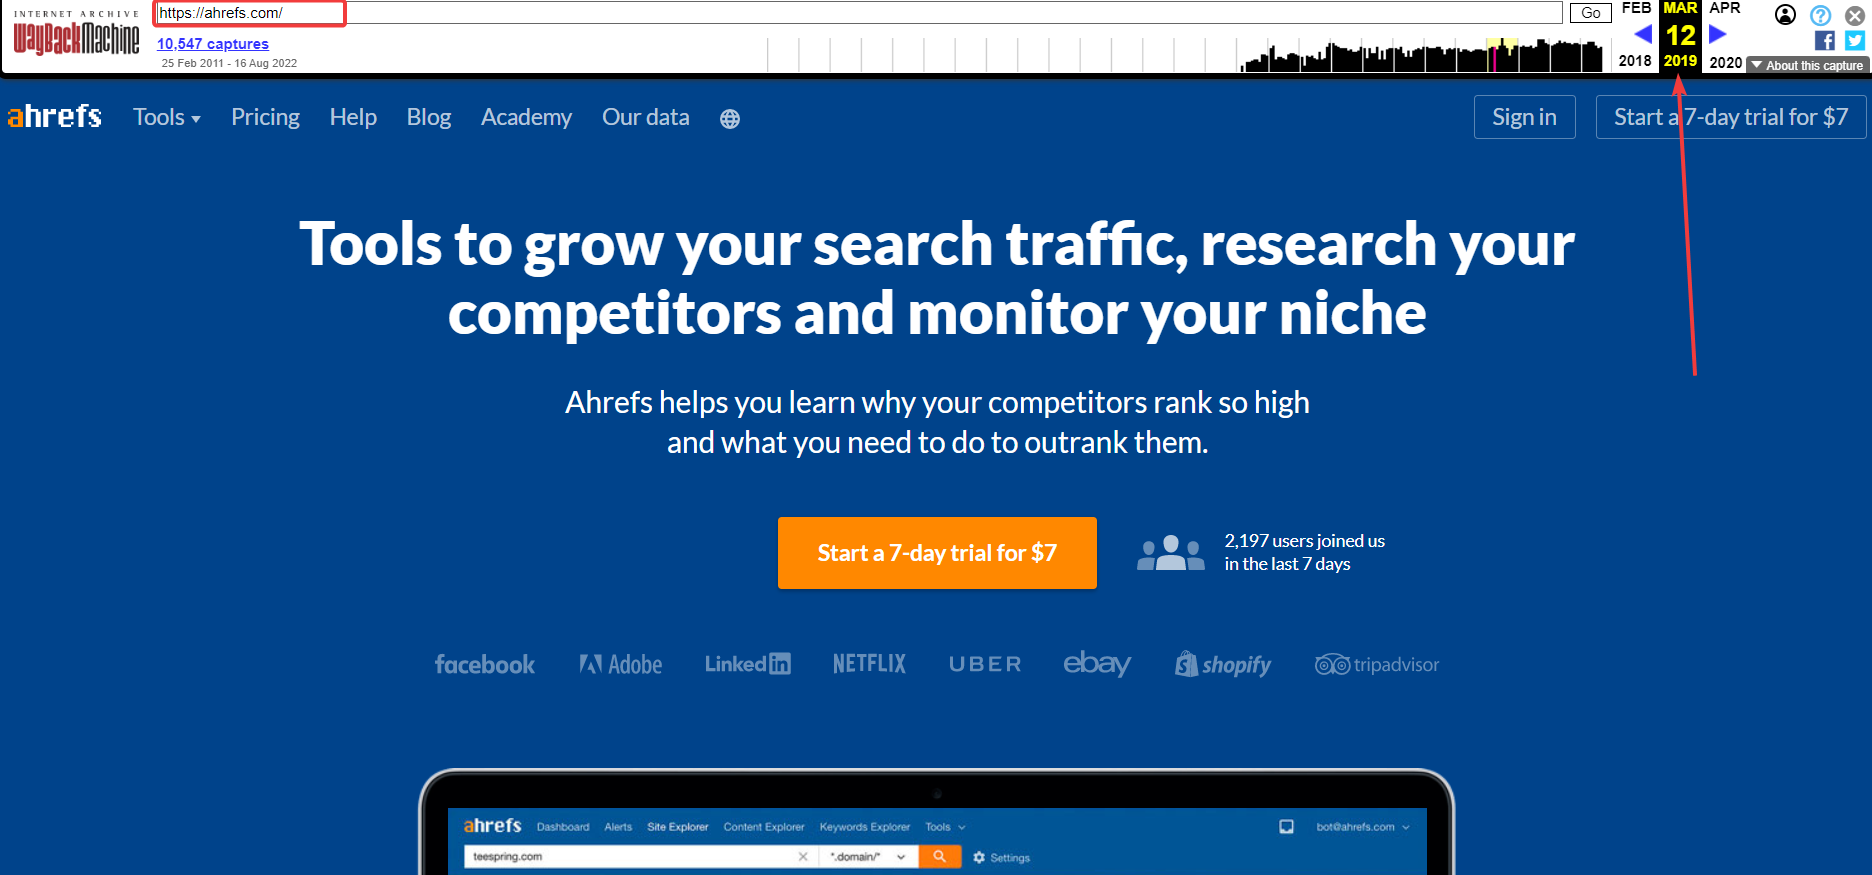 Ahrefs’ homepage in 2019. A snapshot from the Wayback machine